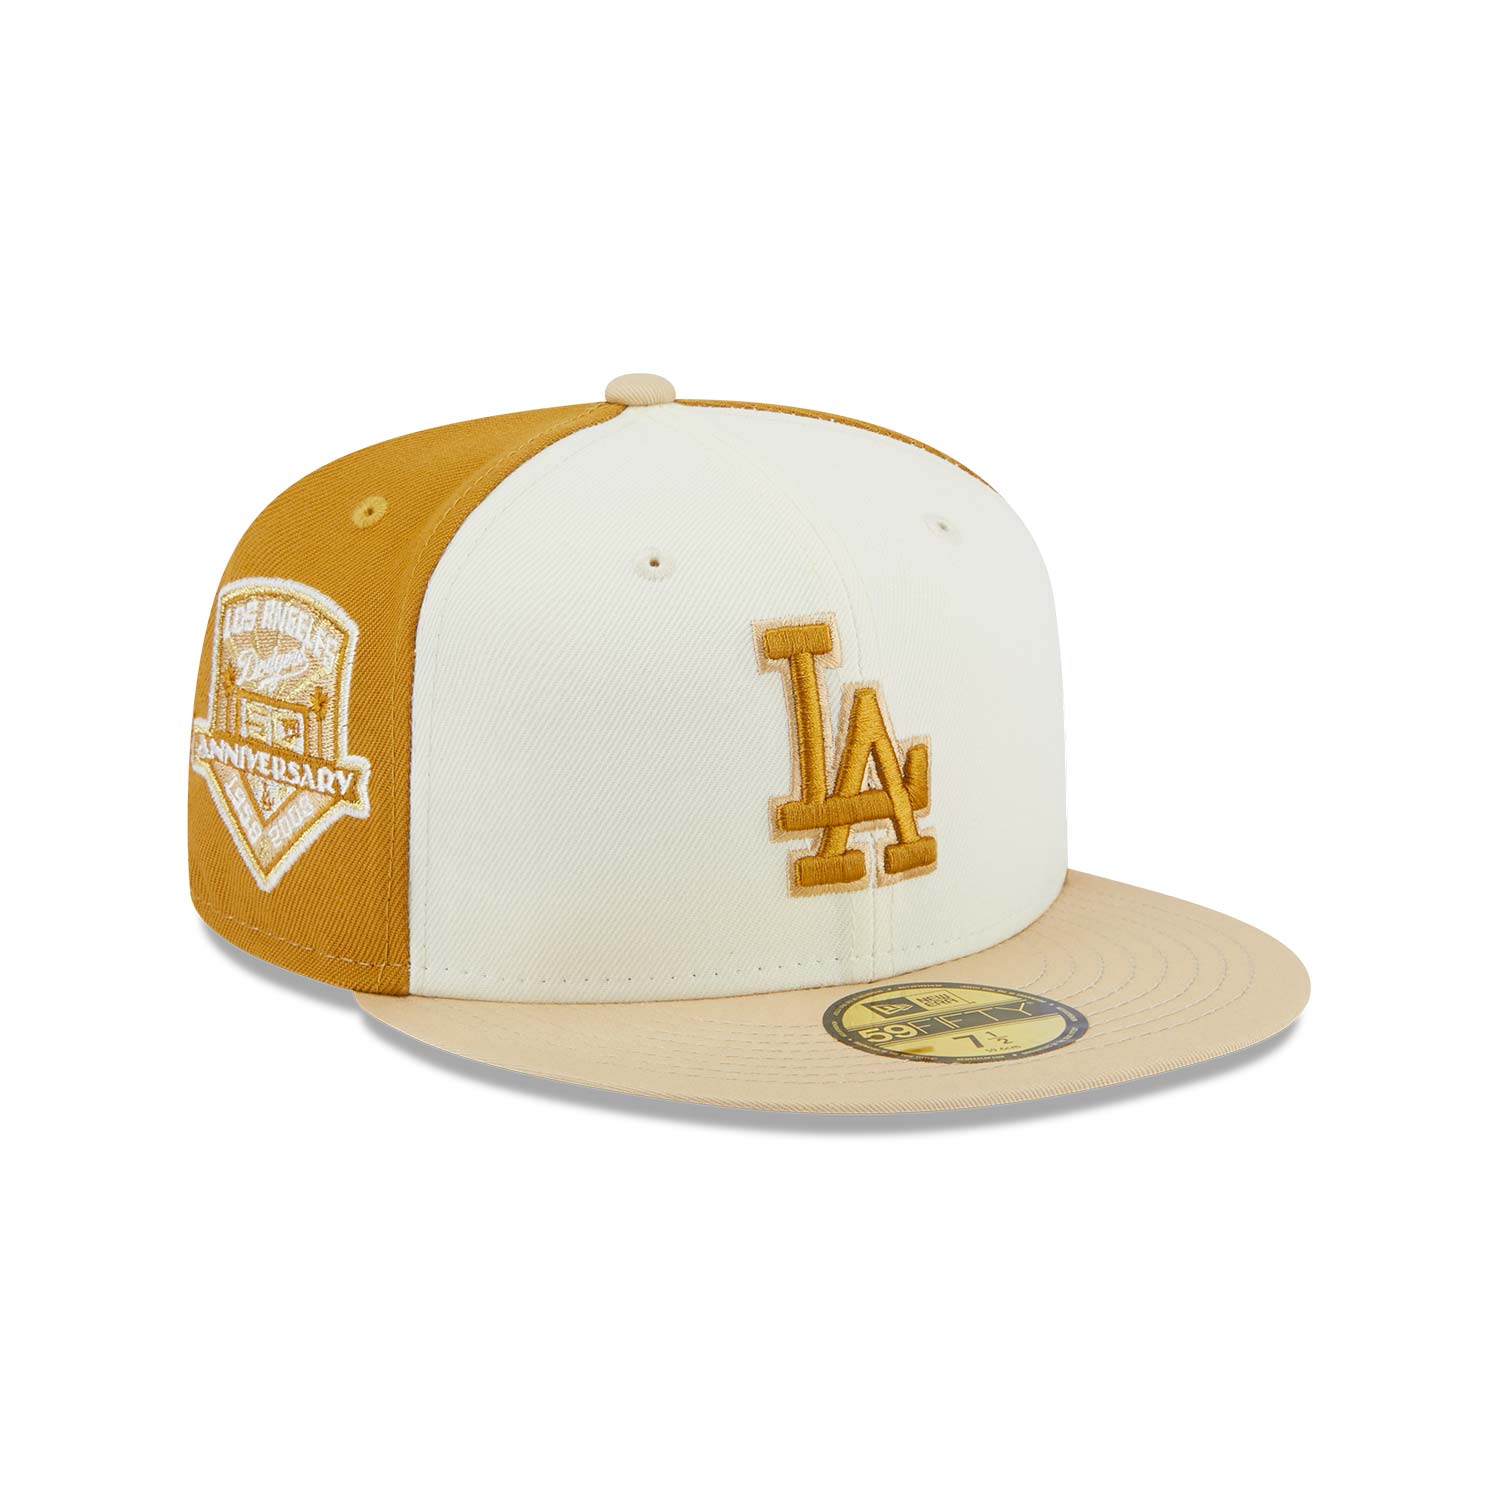 Official New Era Anniversary LA Dodgers 59FIFTY Fitted Cap C125_343 ...